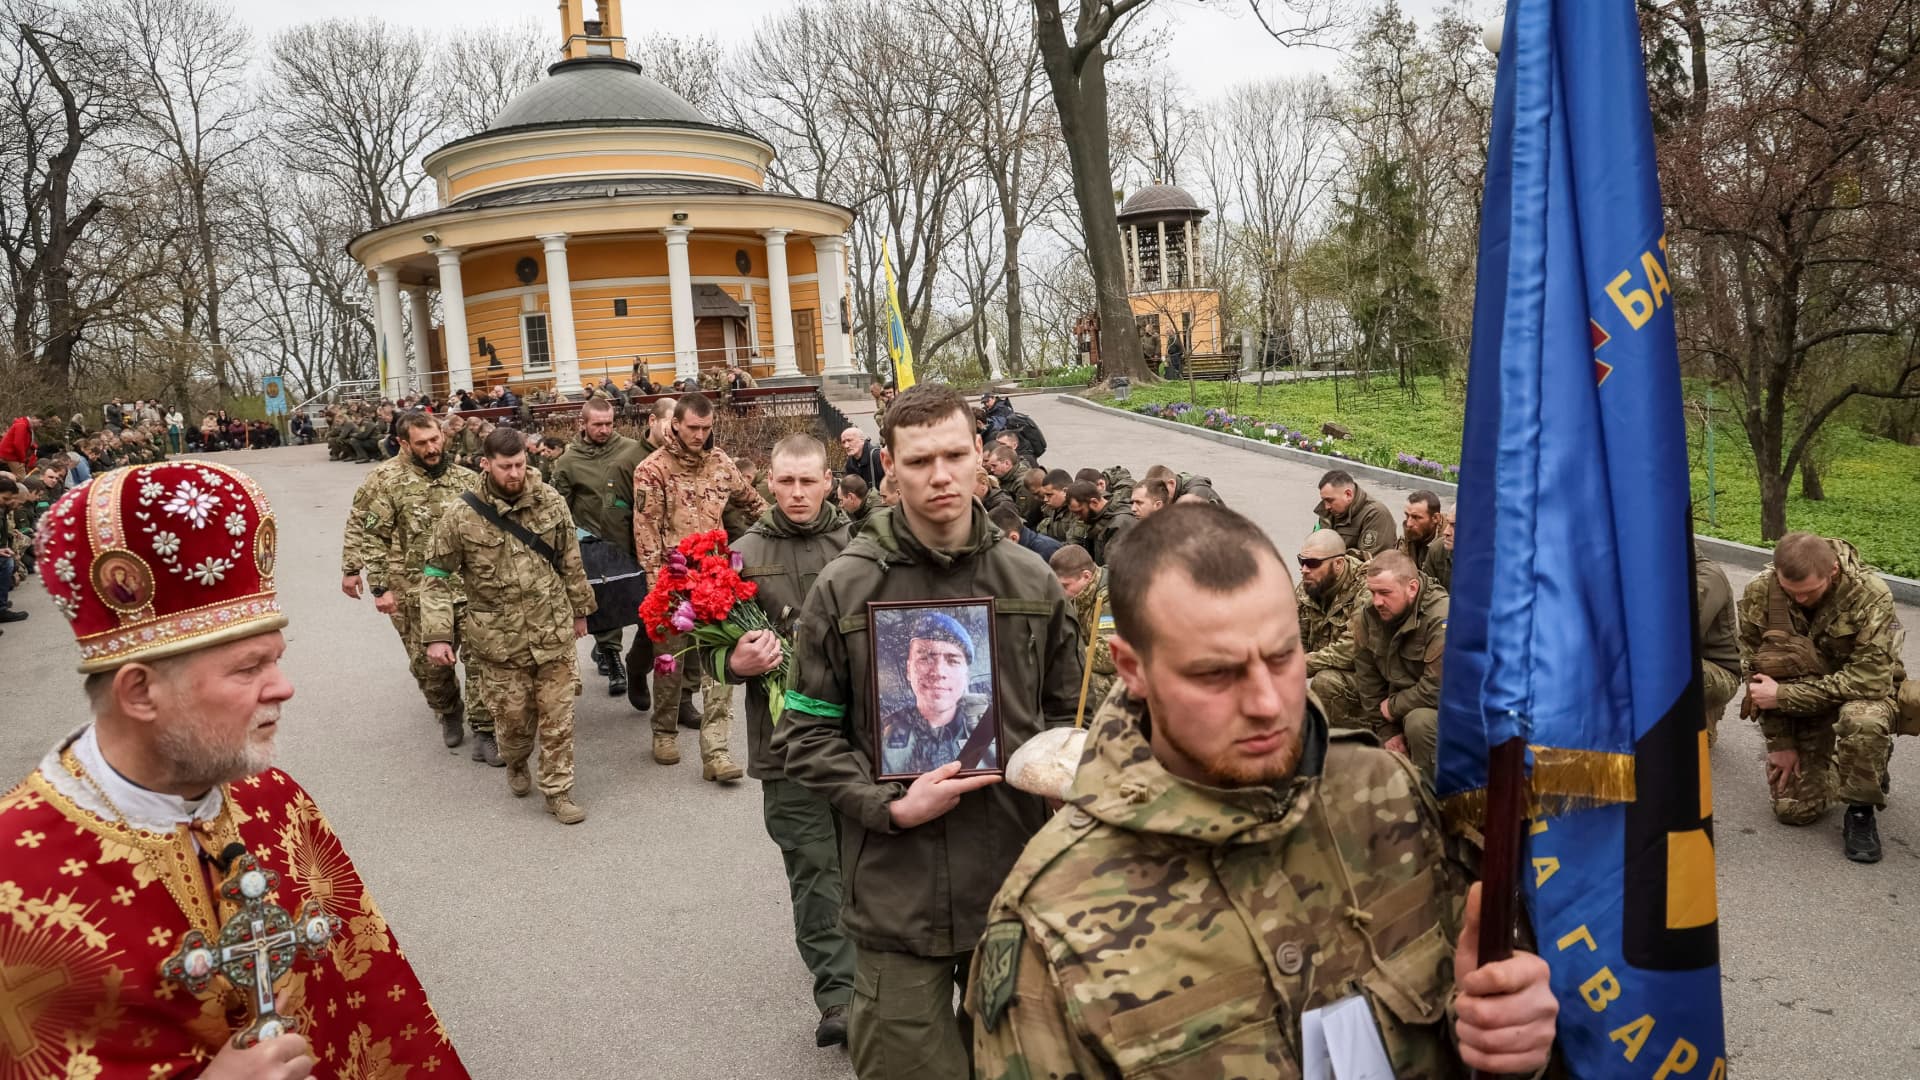 Servicemen of the Ukrainian National Guard attend the funeral of the four of their fellow servicemen, who were killed during Russia's invasion of Ukraine, in Kyiv, Ukraine, April 20, 2022.